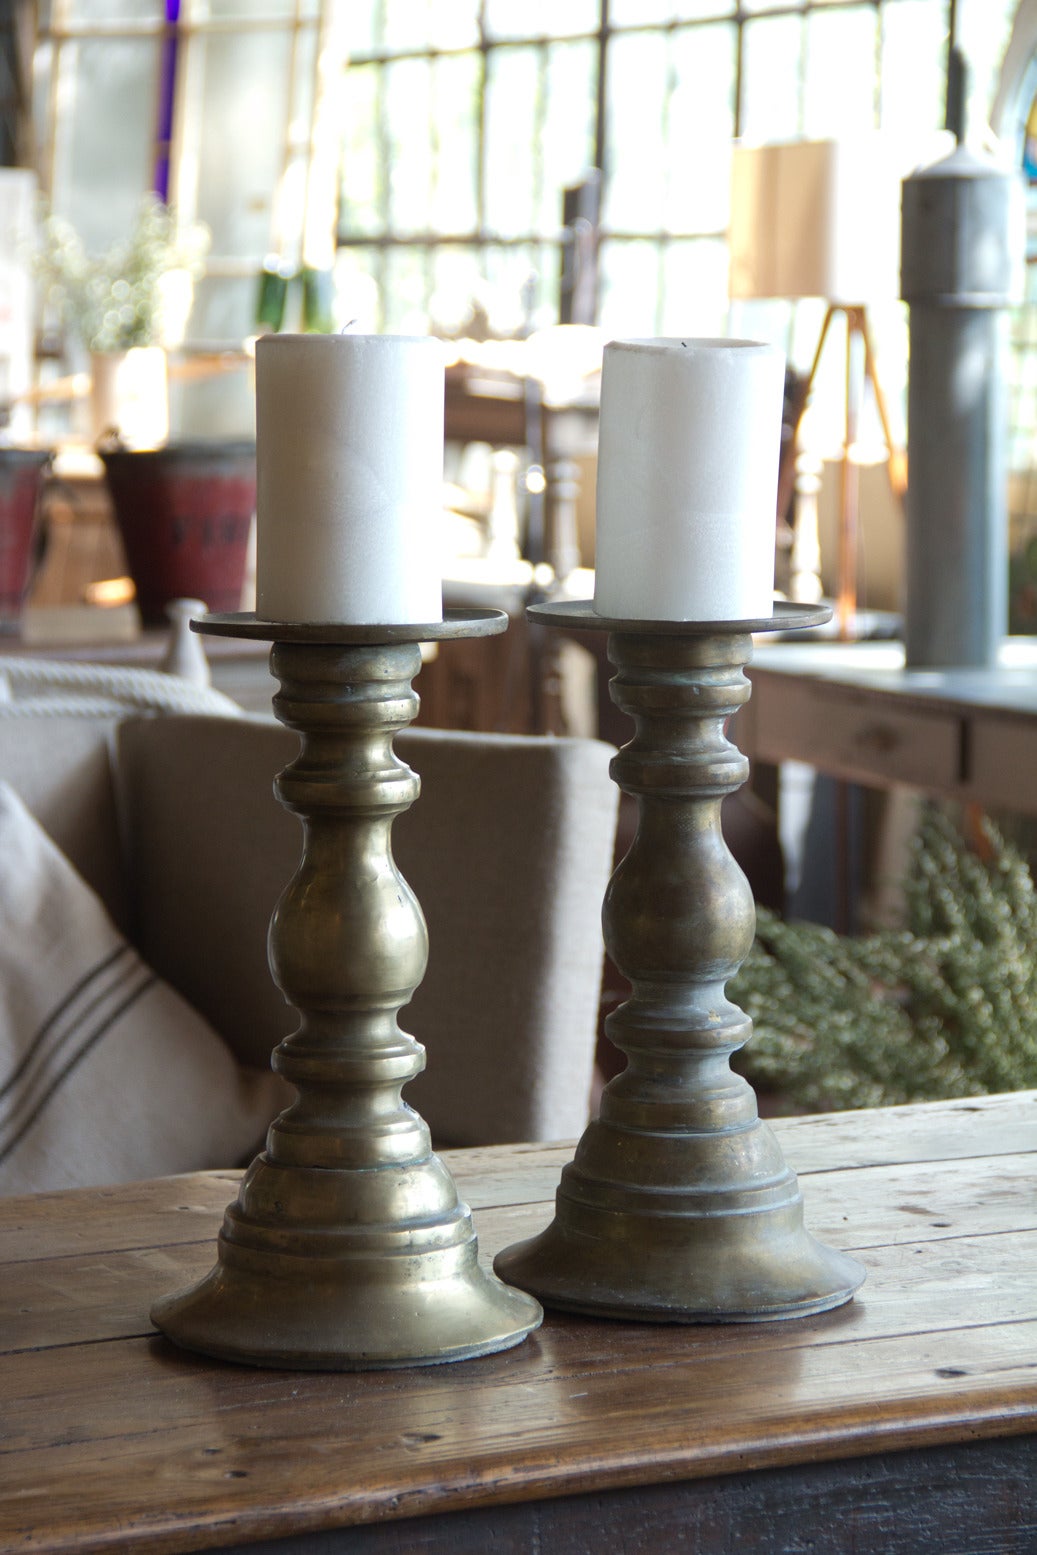 Pair of very heavy beautiful 19th century solid brass chapel pricket candlesticks from France.